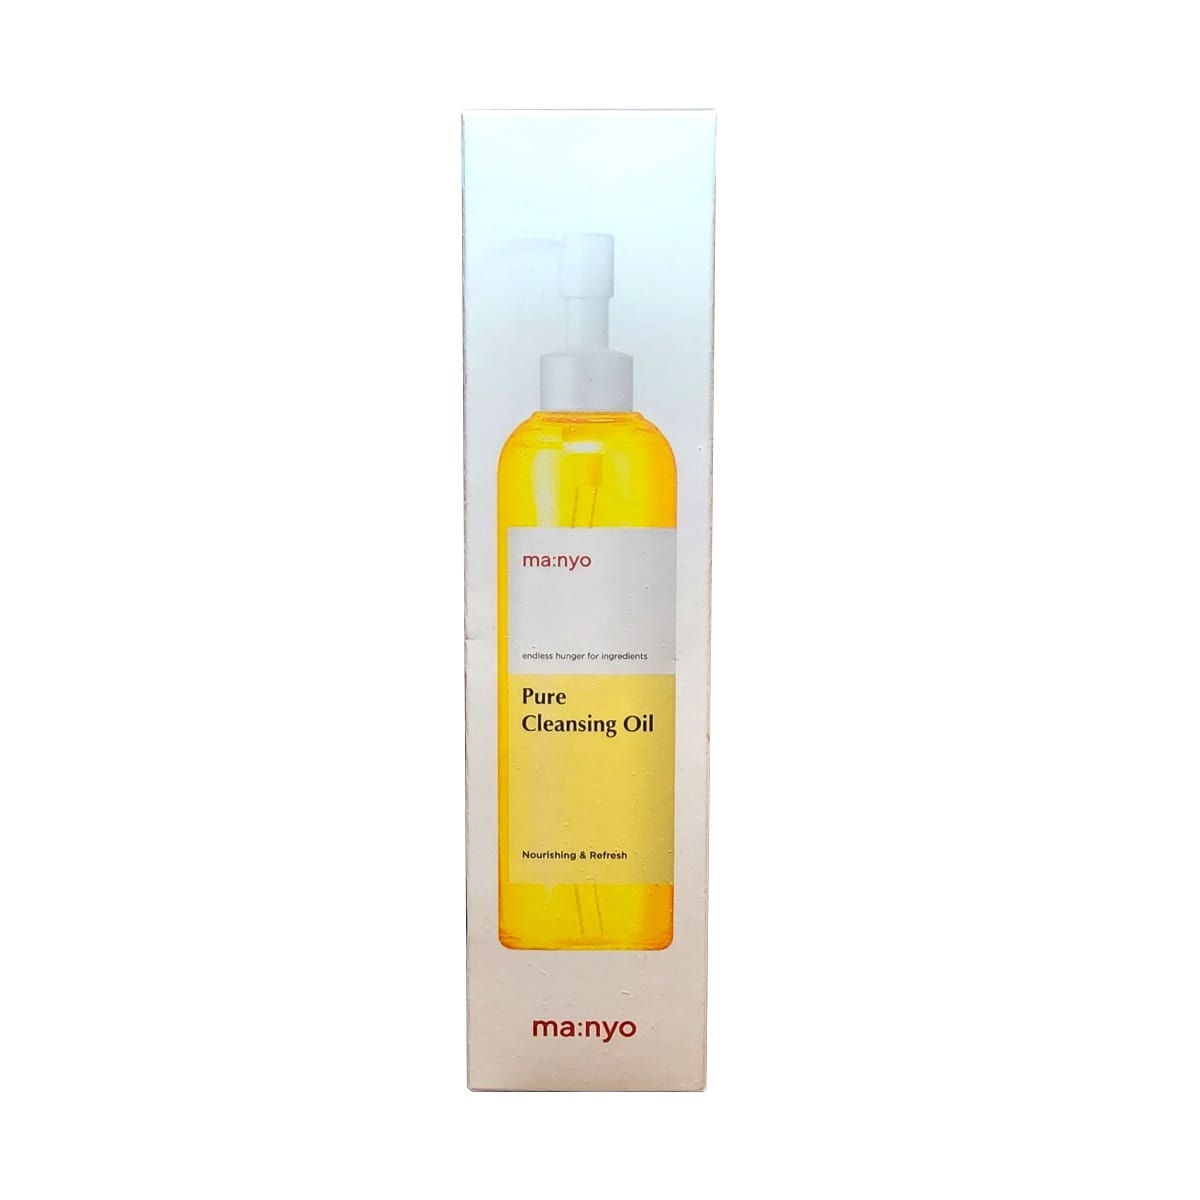 Product label for ma:nyo Pure Cleansing Oil (200 mL)